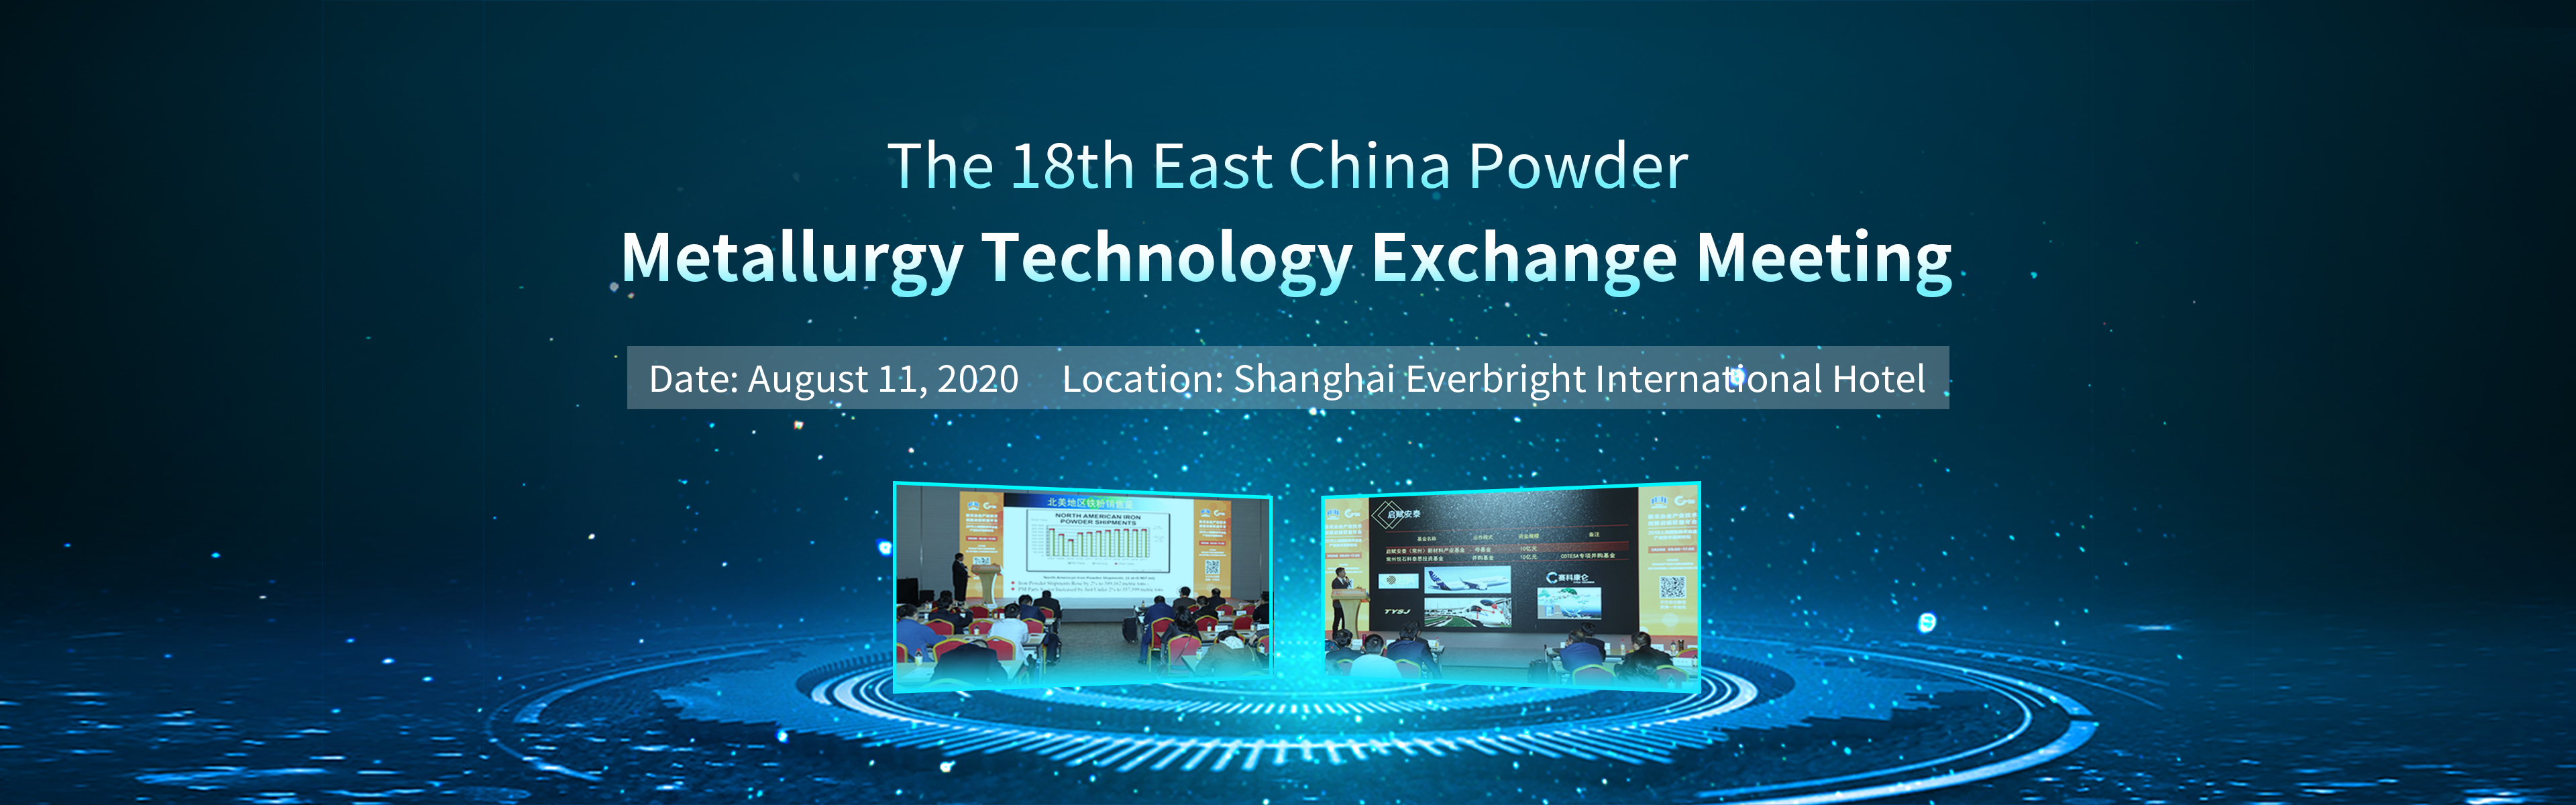 The 18th East China Powder Metallurgy Technology Exchange Meeting